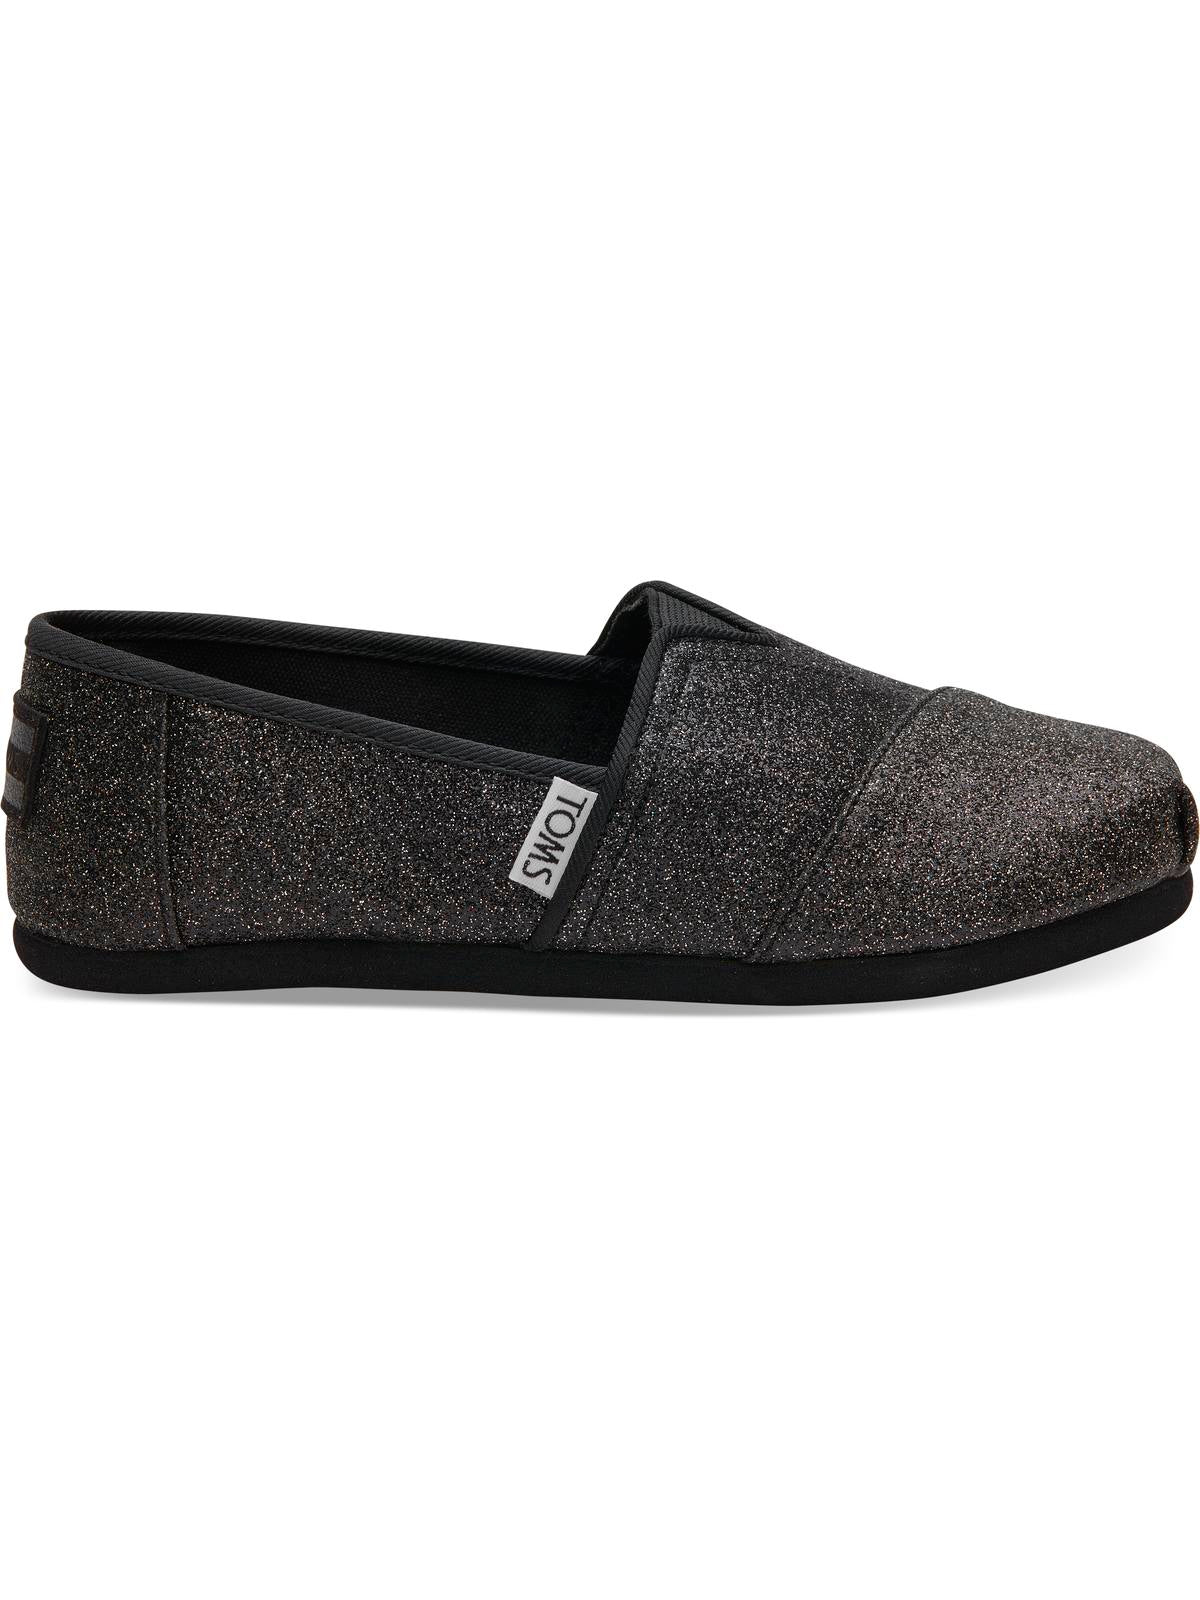 TOMS Classic Girls Glitter Casual Slip-On Shoes